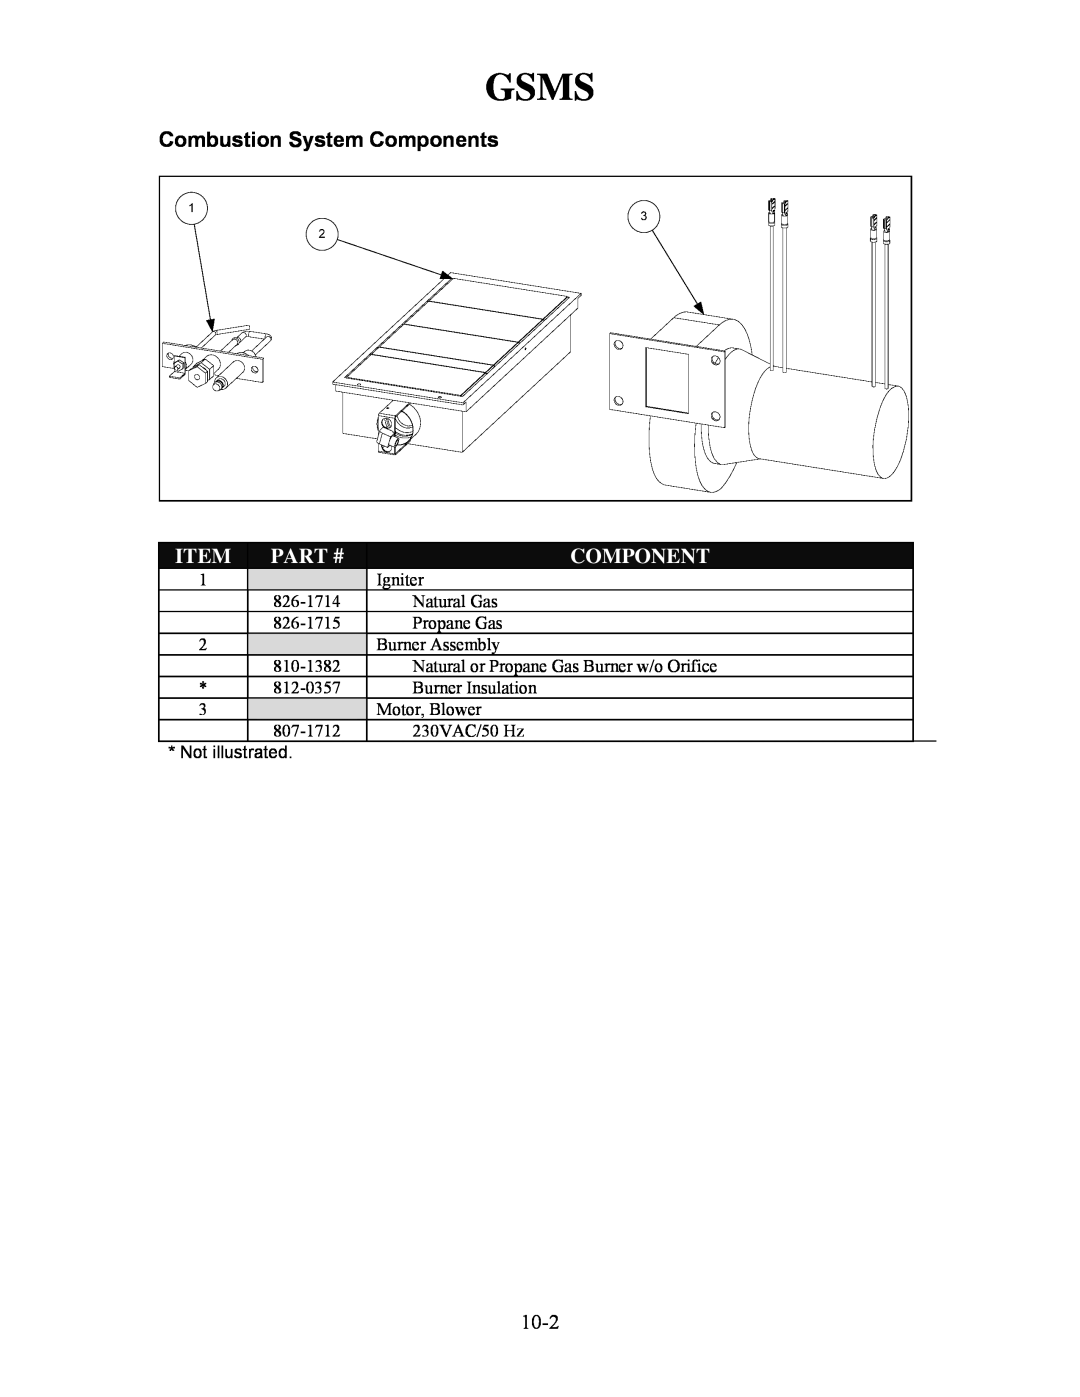 Frymaster H55 manual 10-2, Gsms, Combustion System Components, Part # 